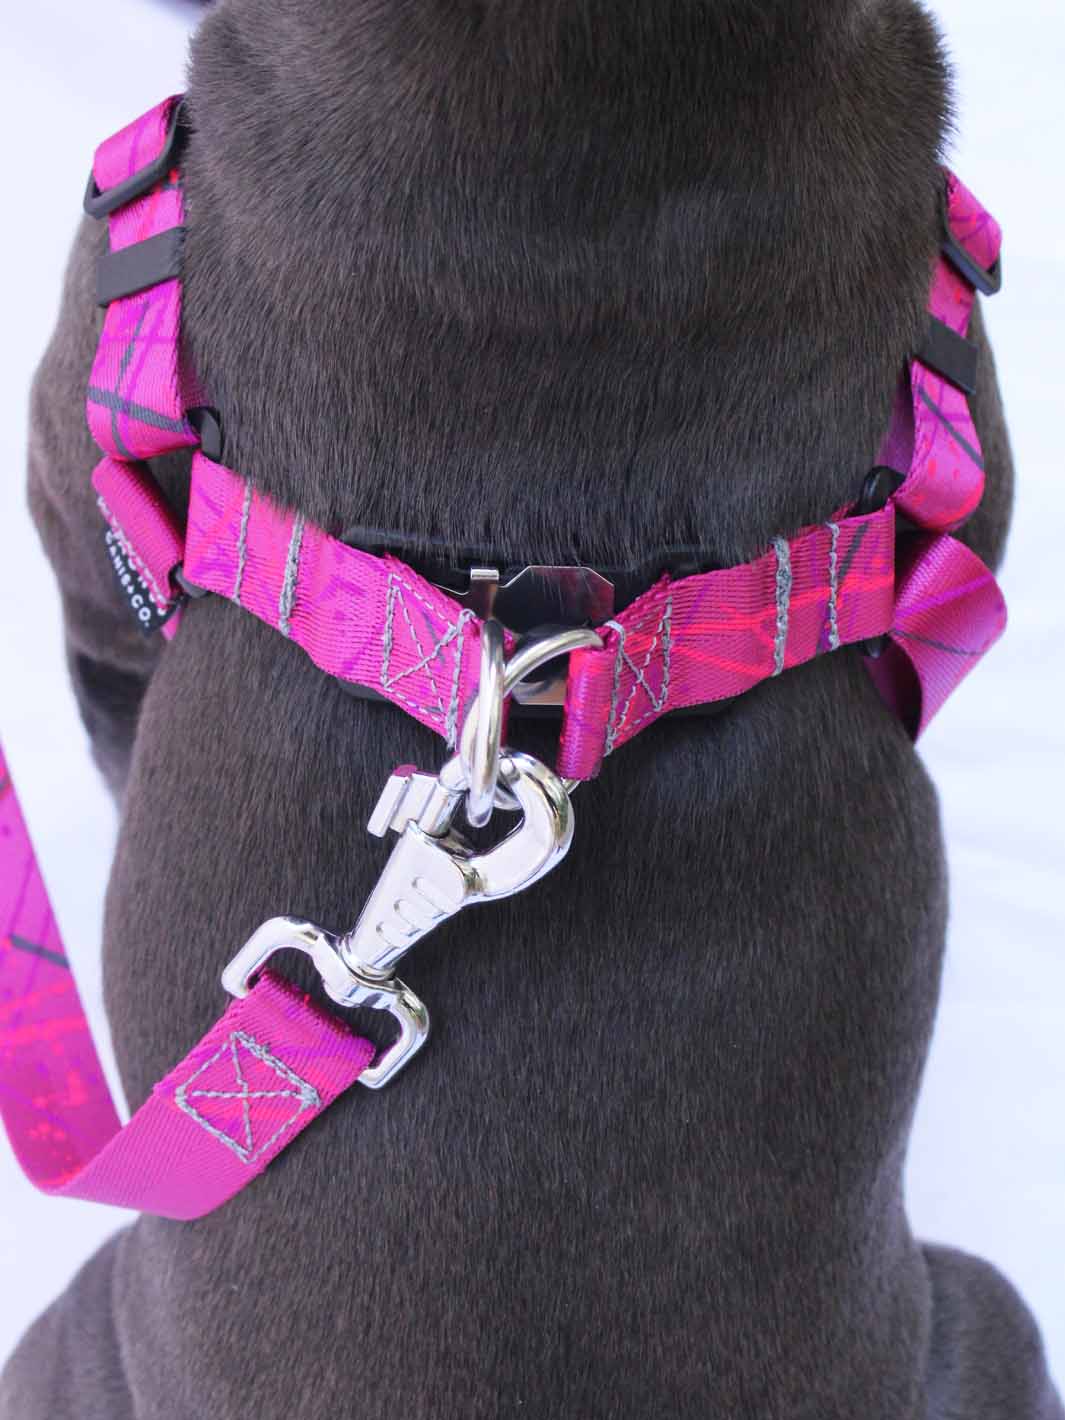 The magnetic buckle on the strutt frenchie harness by MAGNUS Canis.